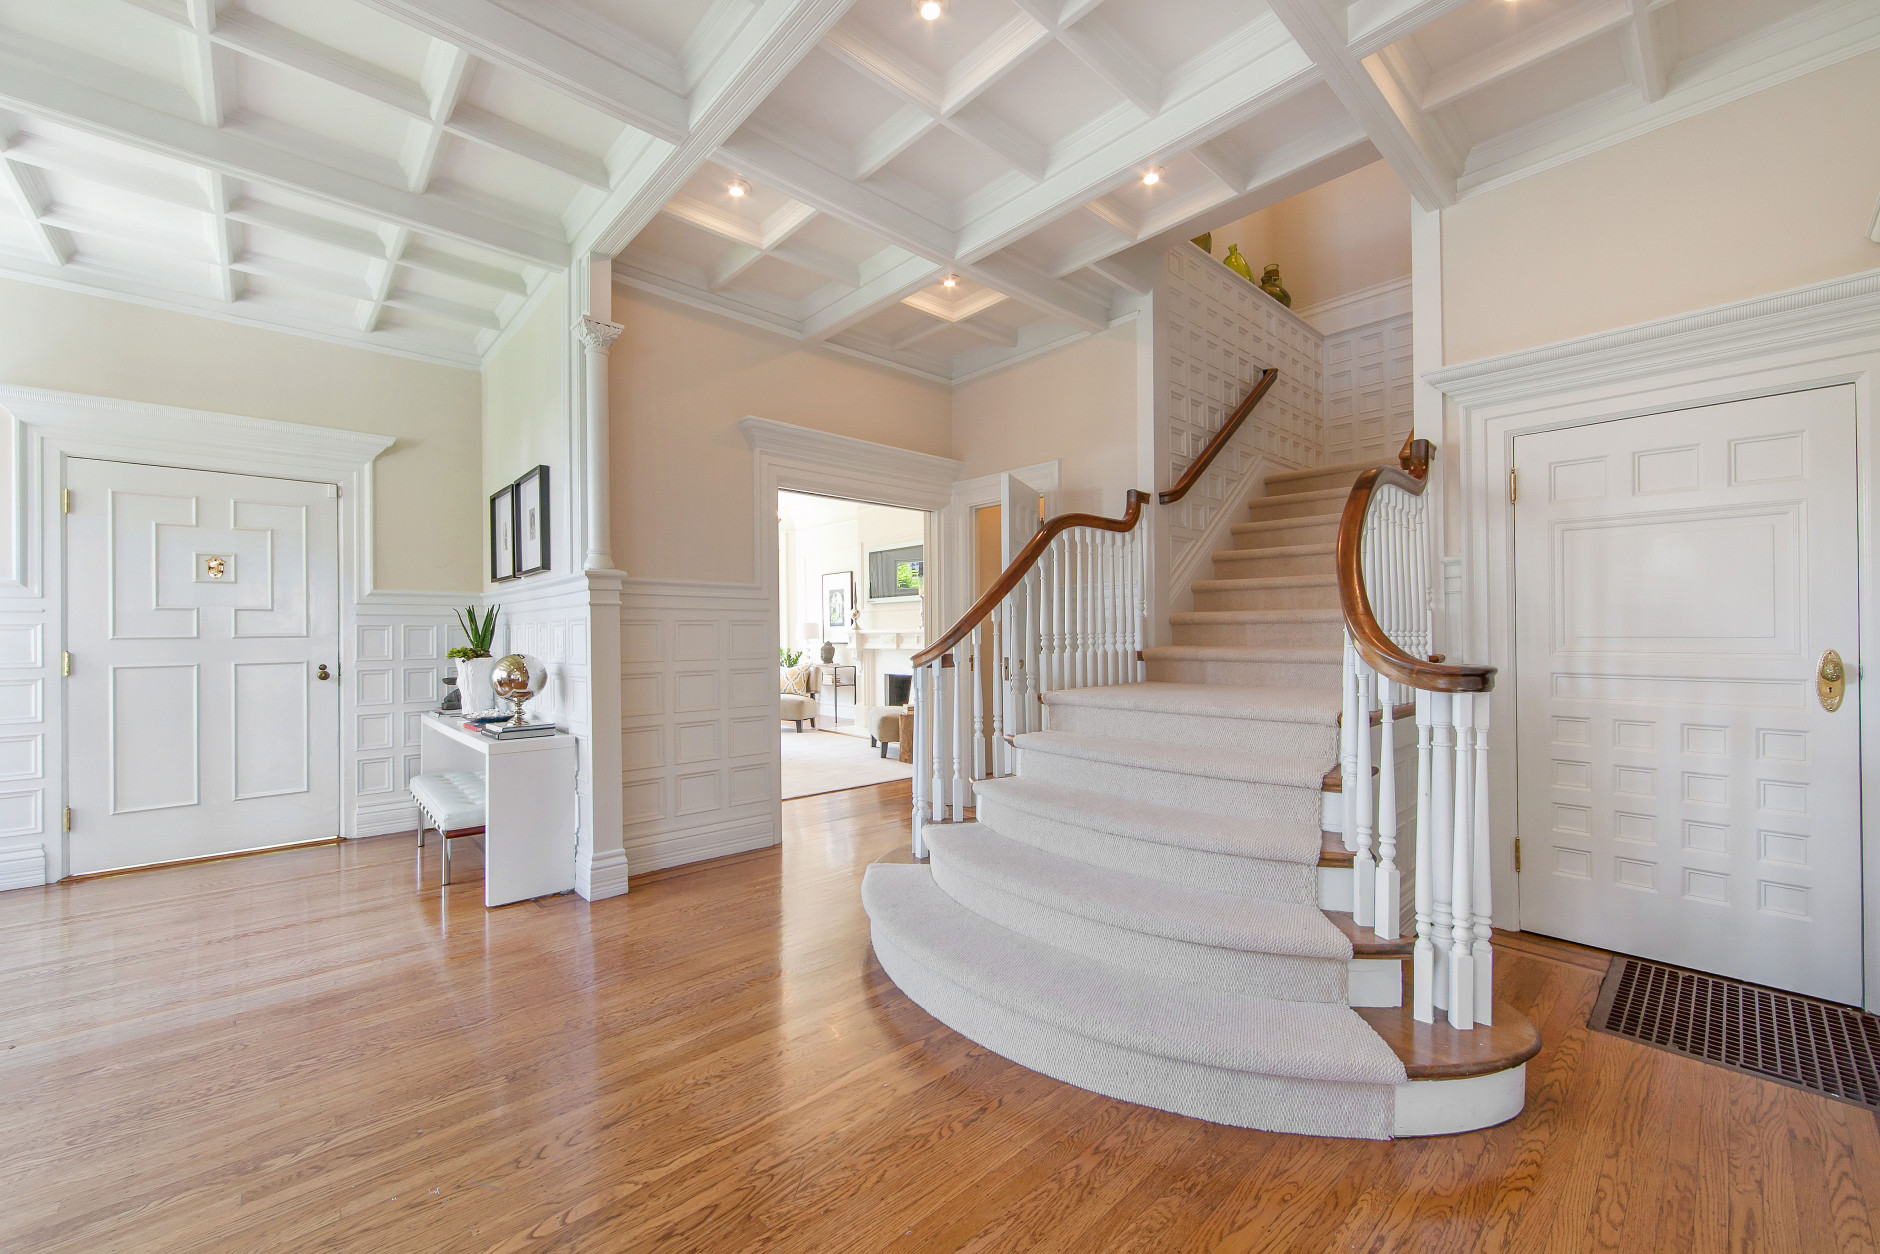 One of the focal points in the house is the curved stairs. (Jason Wakefield/TopTenRealEstate)